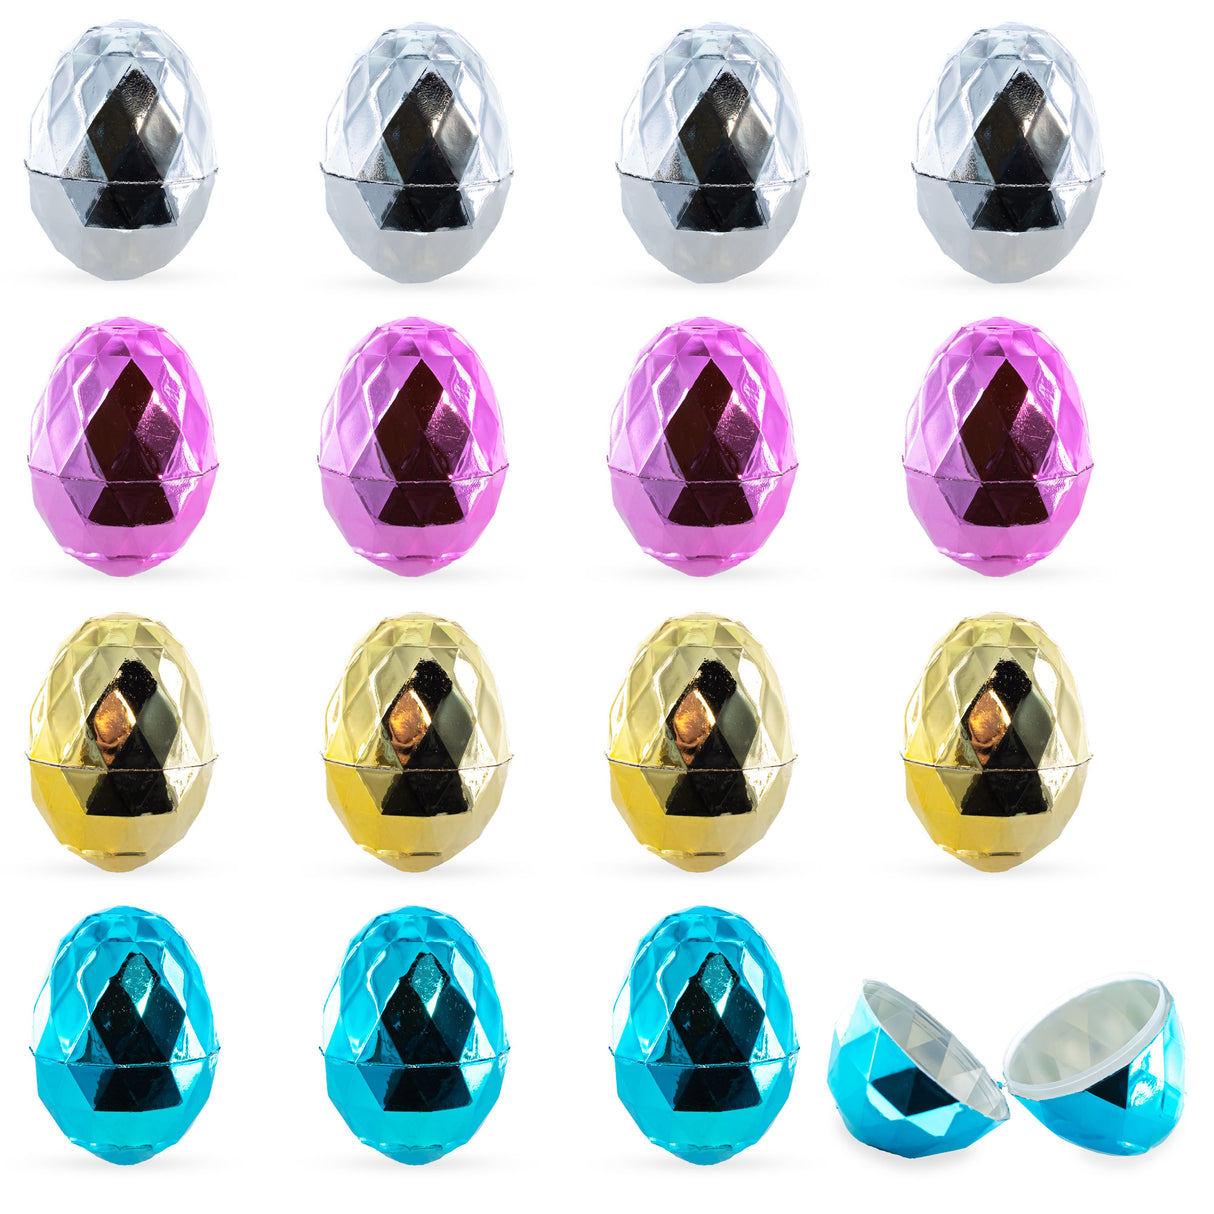 Plastic Dazzling Easter Gems: Set of 16 Multicolored Diamond Plastic Easter Eggs, 2.45 Inches in Multi color Oval